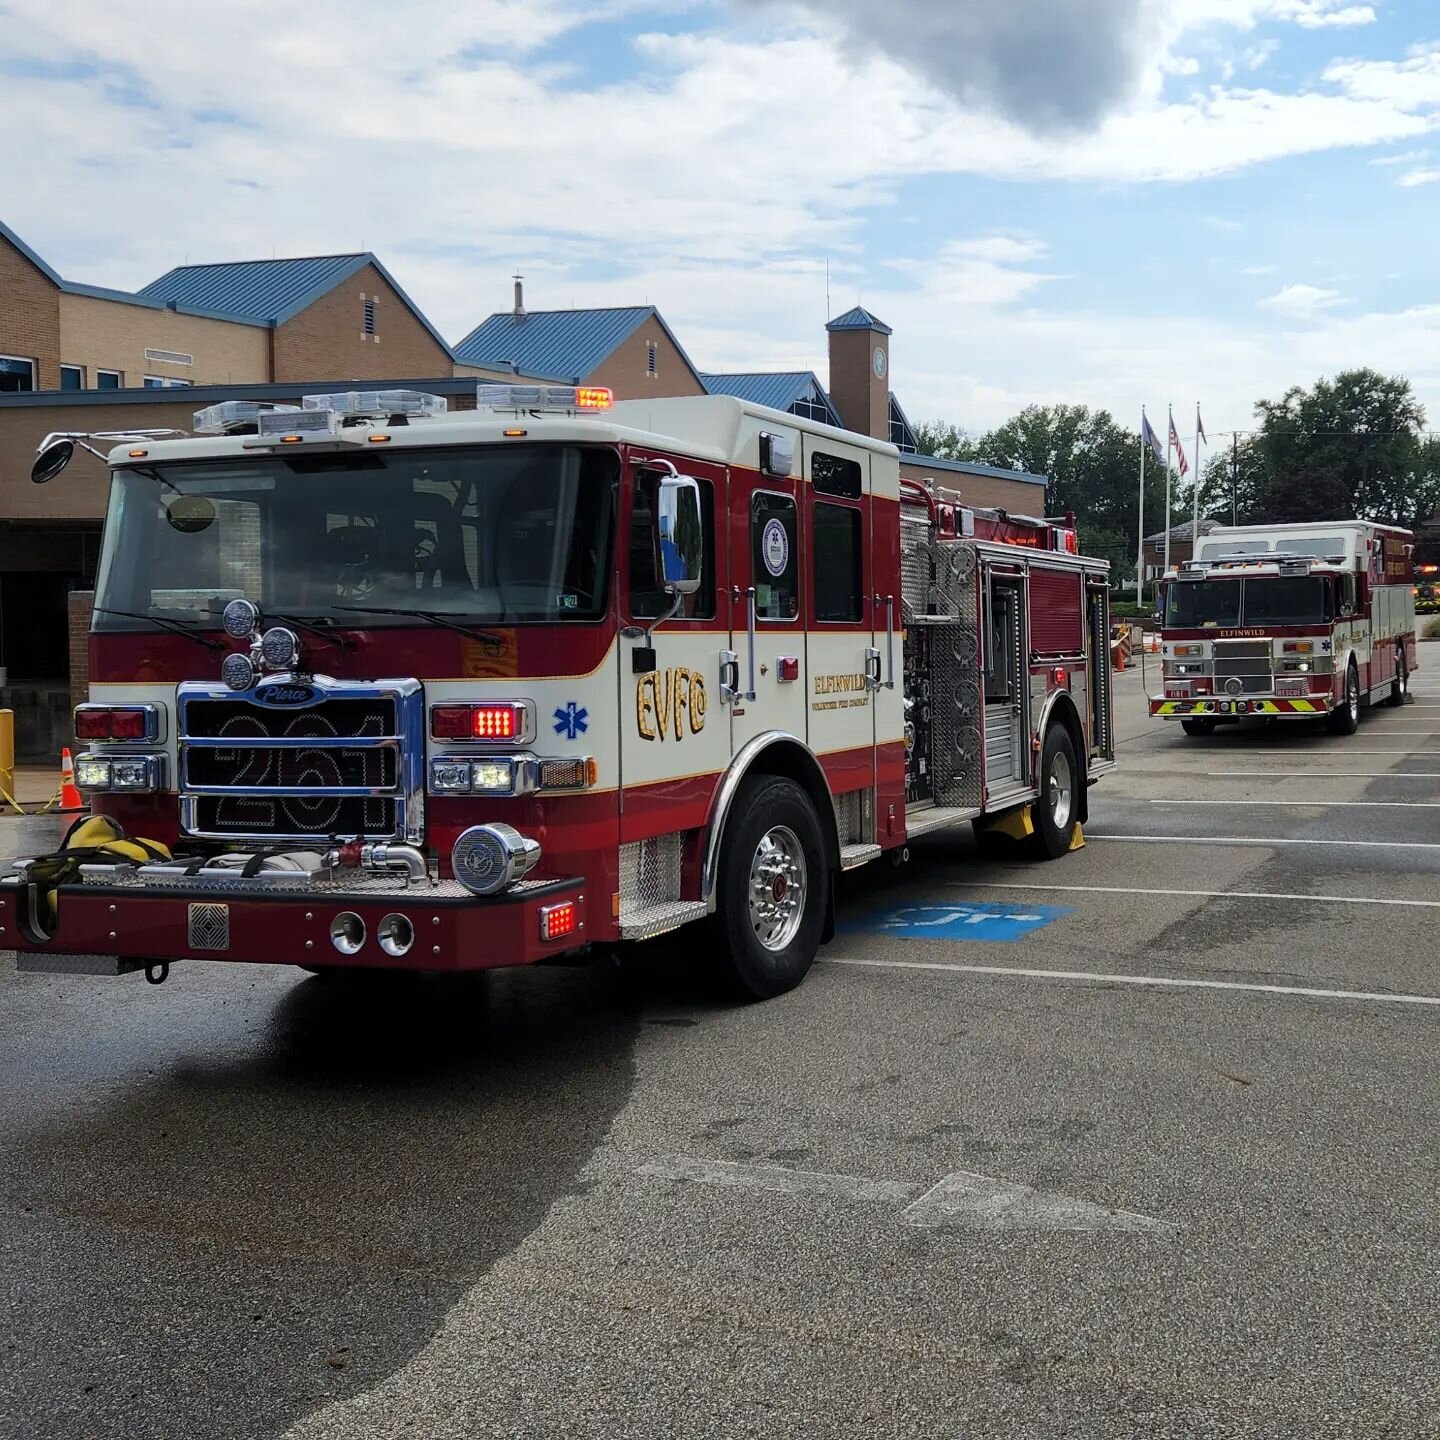 261 Engine 1 and Rescue 3 for a fire alarm at the Middle --- NO, it is NOT the Middle School, it will always be known as the &quot;Old High School&quot; (And the Scott Ave. building as &quot;The Old Junior High&quot; and that 40 year old building on 